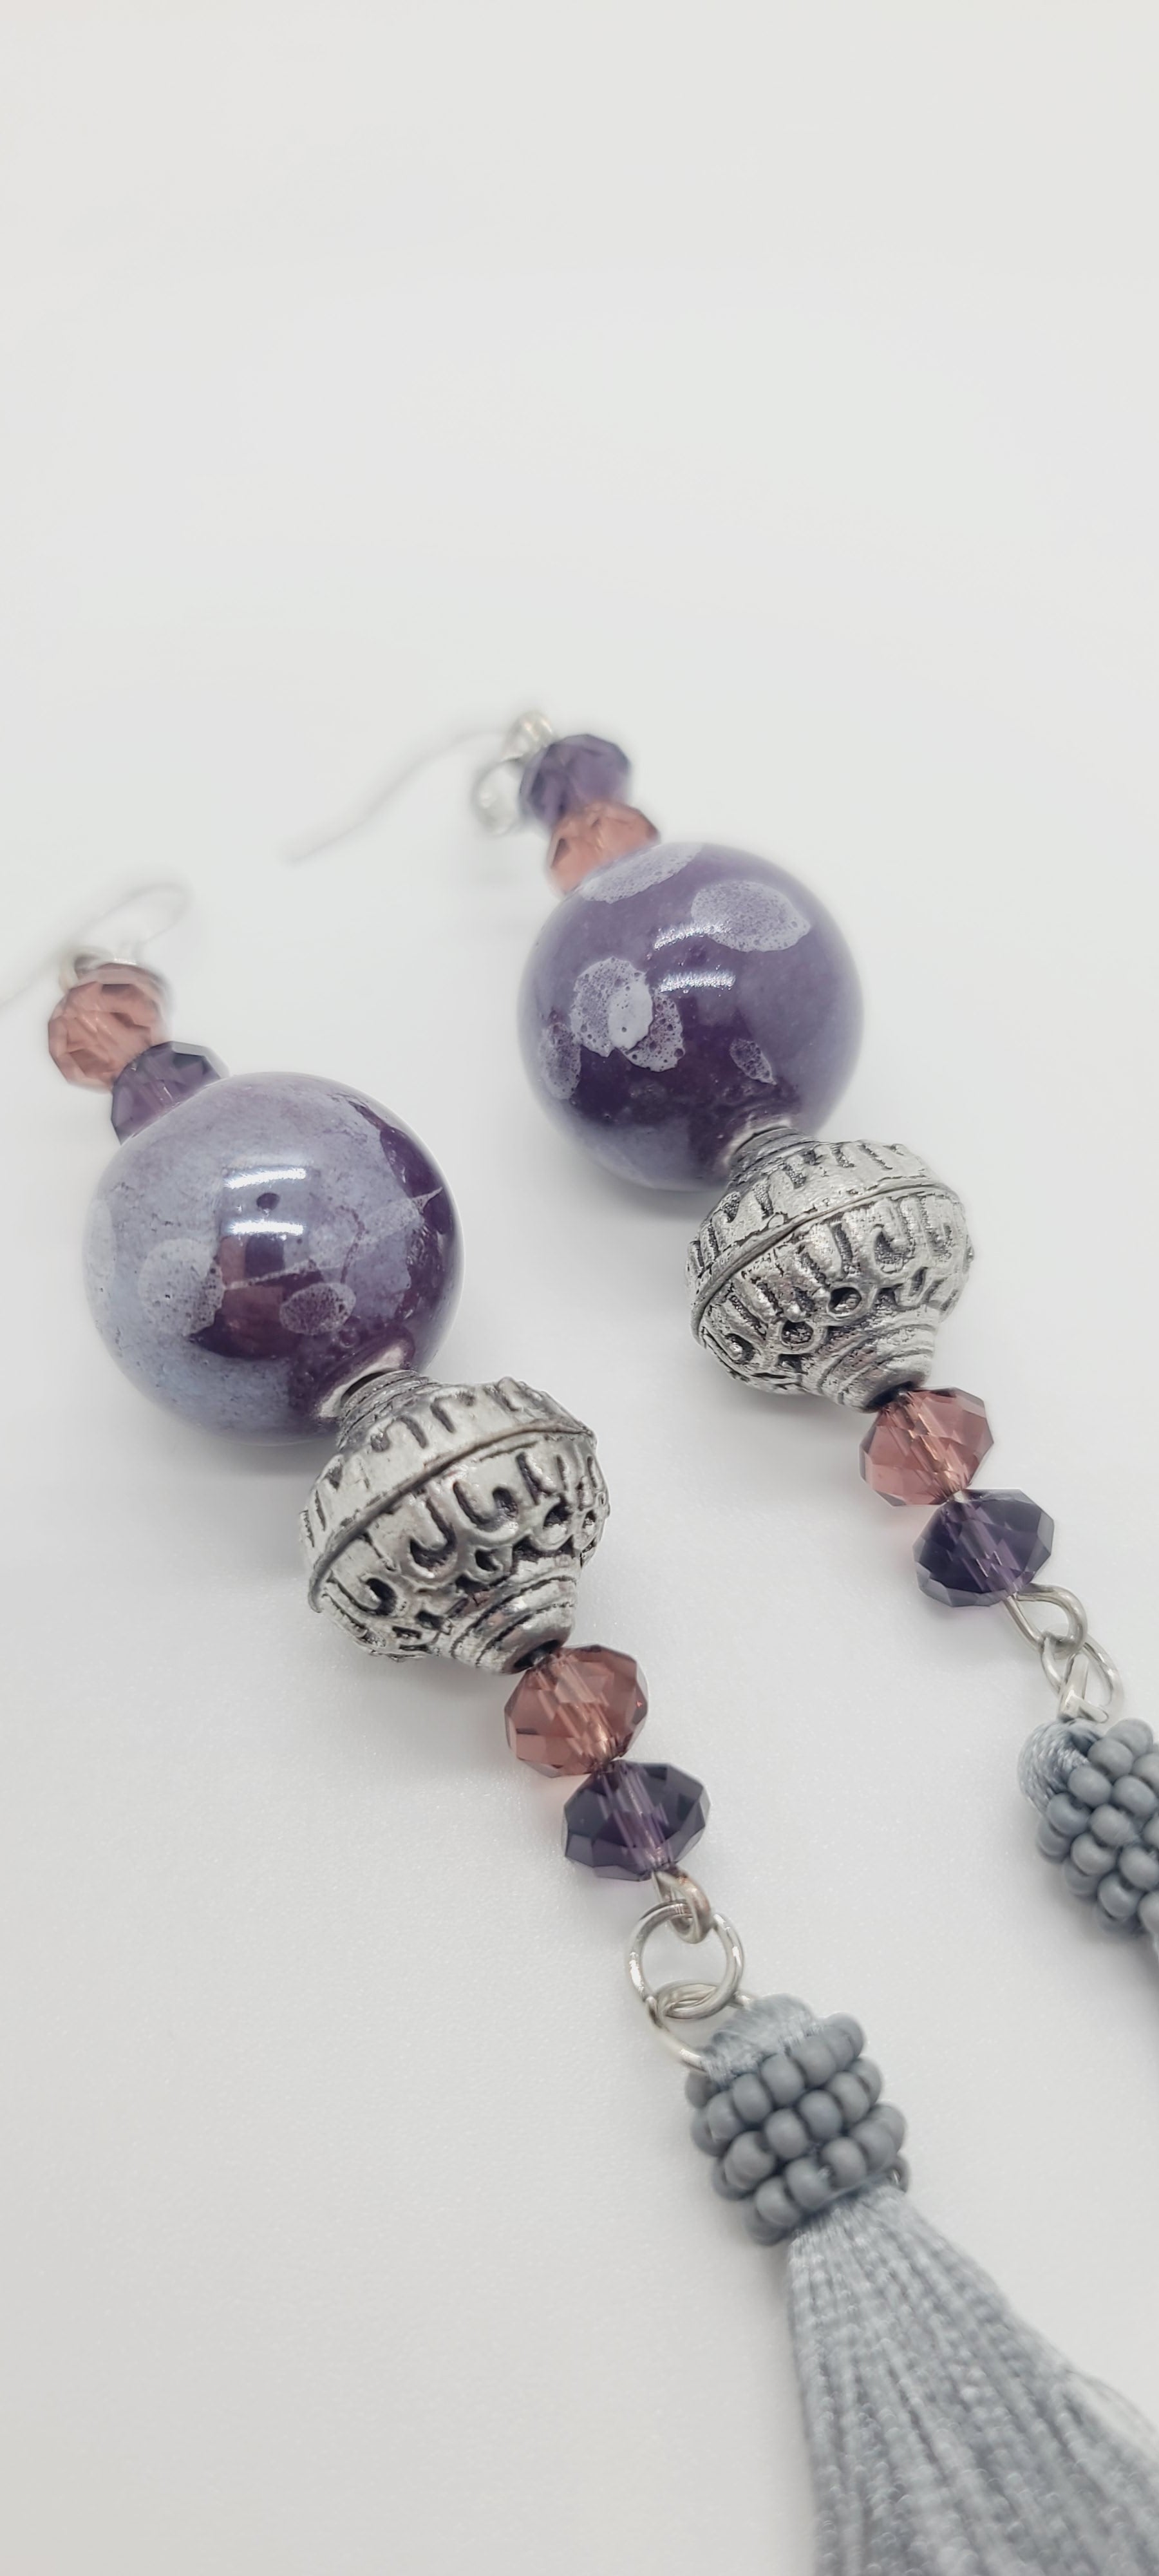 Length: 5 inches | Weight: 1.2 ounces  Distinctly You! These earrings are made with 20mm purple iridescent ceramic stones, 16mm metal lanterns, 6mm purple and pink faceted glass stones, and grey tassels.